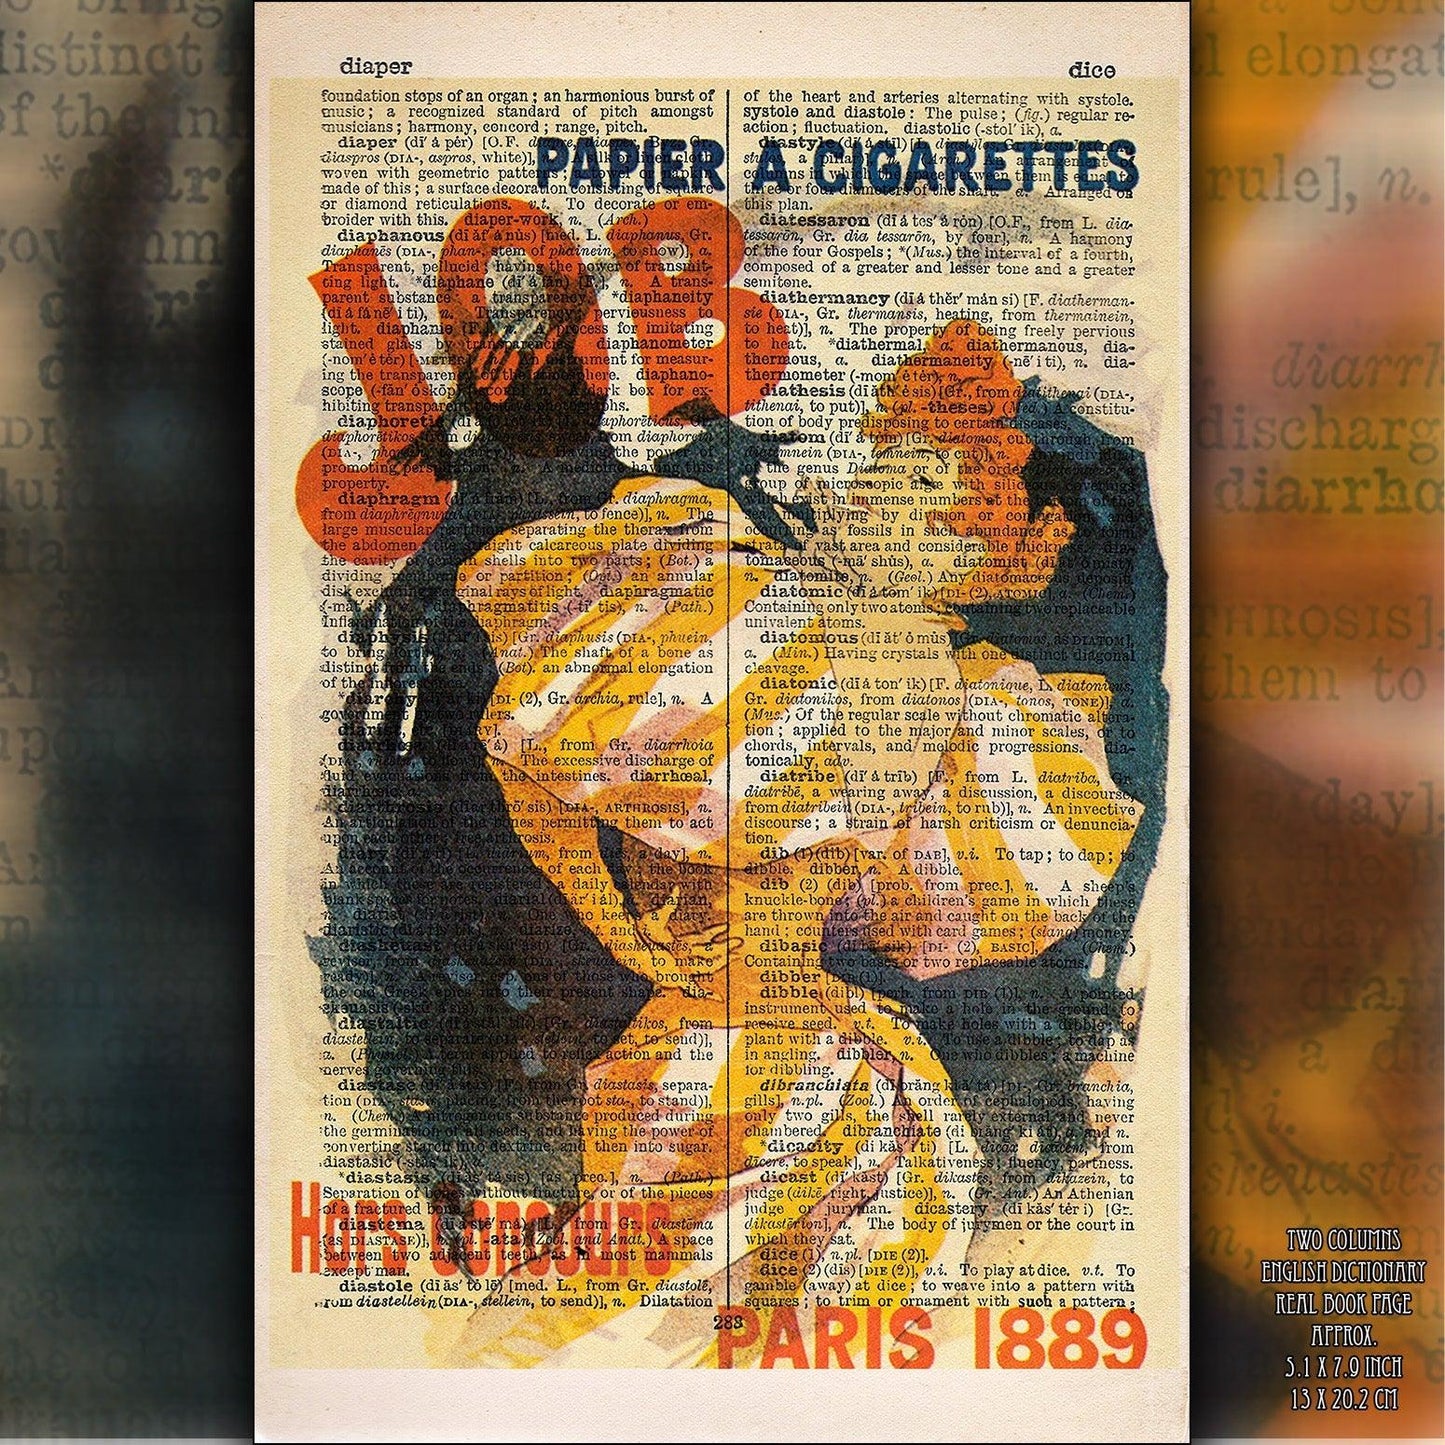 Experience the timeless charm of "JOB, PAPIER A CIGARETTES," a captivating collage featuring an iconic cigaret paper advertisement design by Jules Chéret, a renowned French graphic designer (1836-1932). Created in 1889, this artwork seamlessly combines history and artistic brilliance.